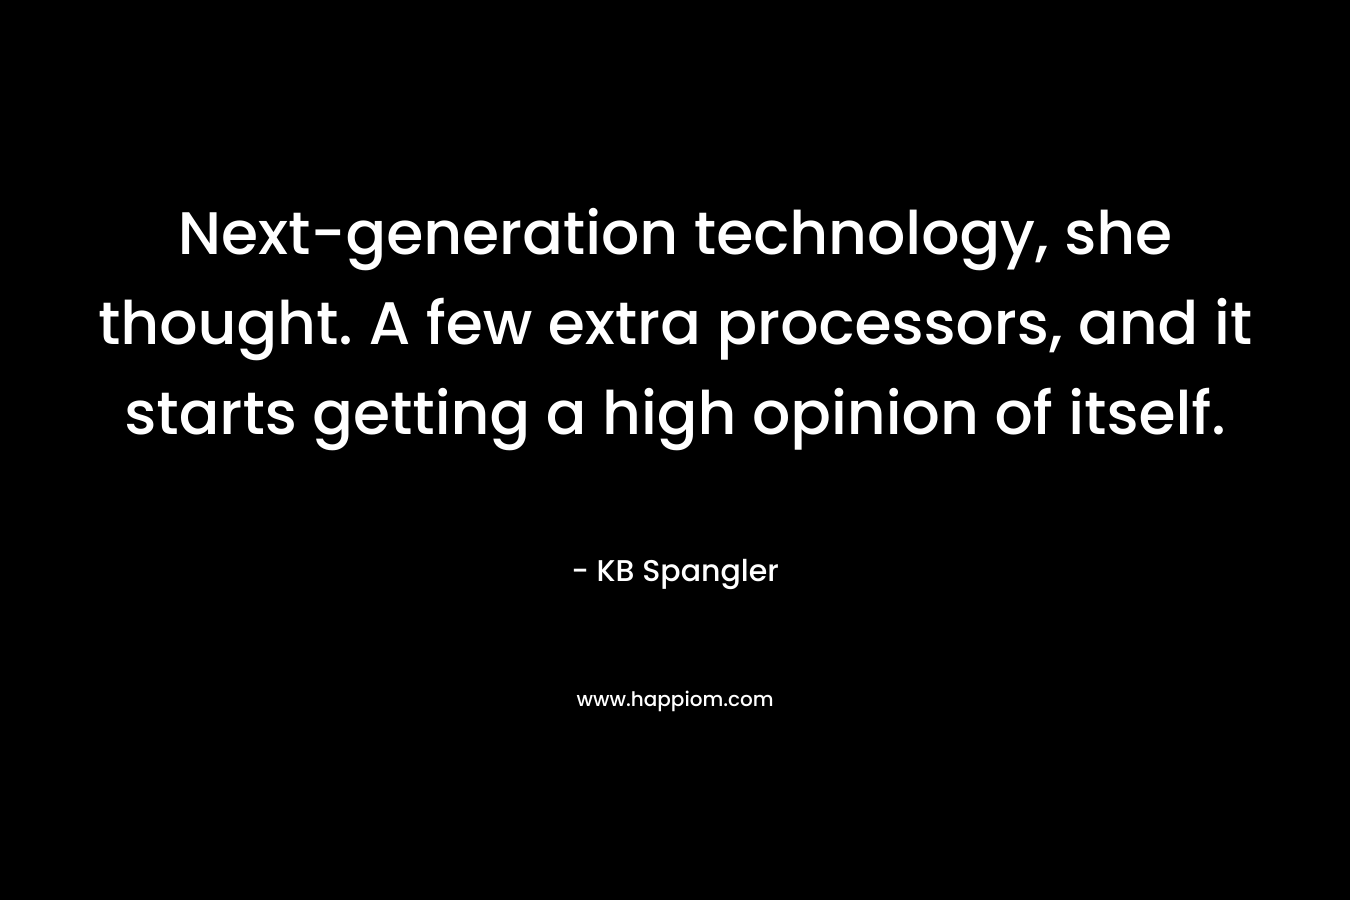 Next-generation technology, she thought. A few extra processors, and it starts getting a high opinion of itself. – KB Spangler